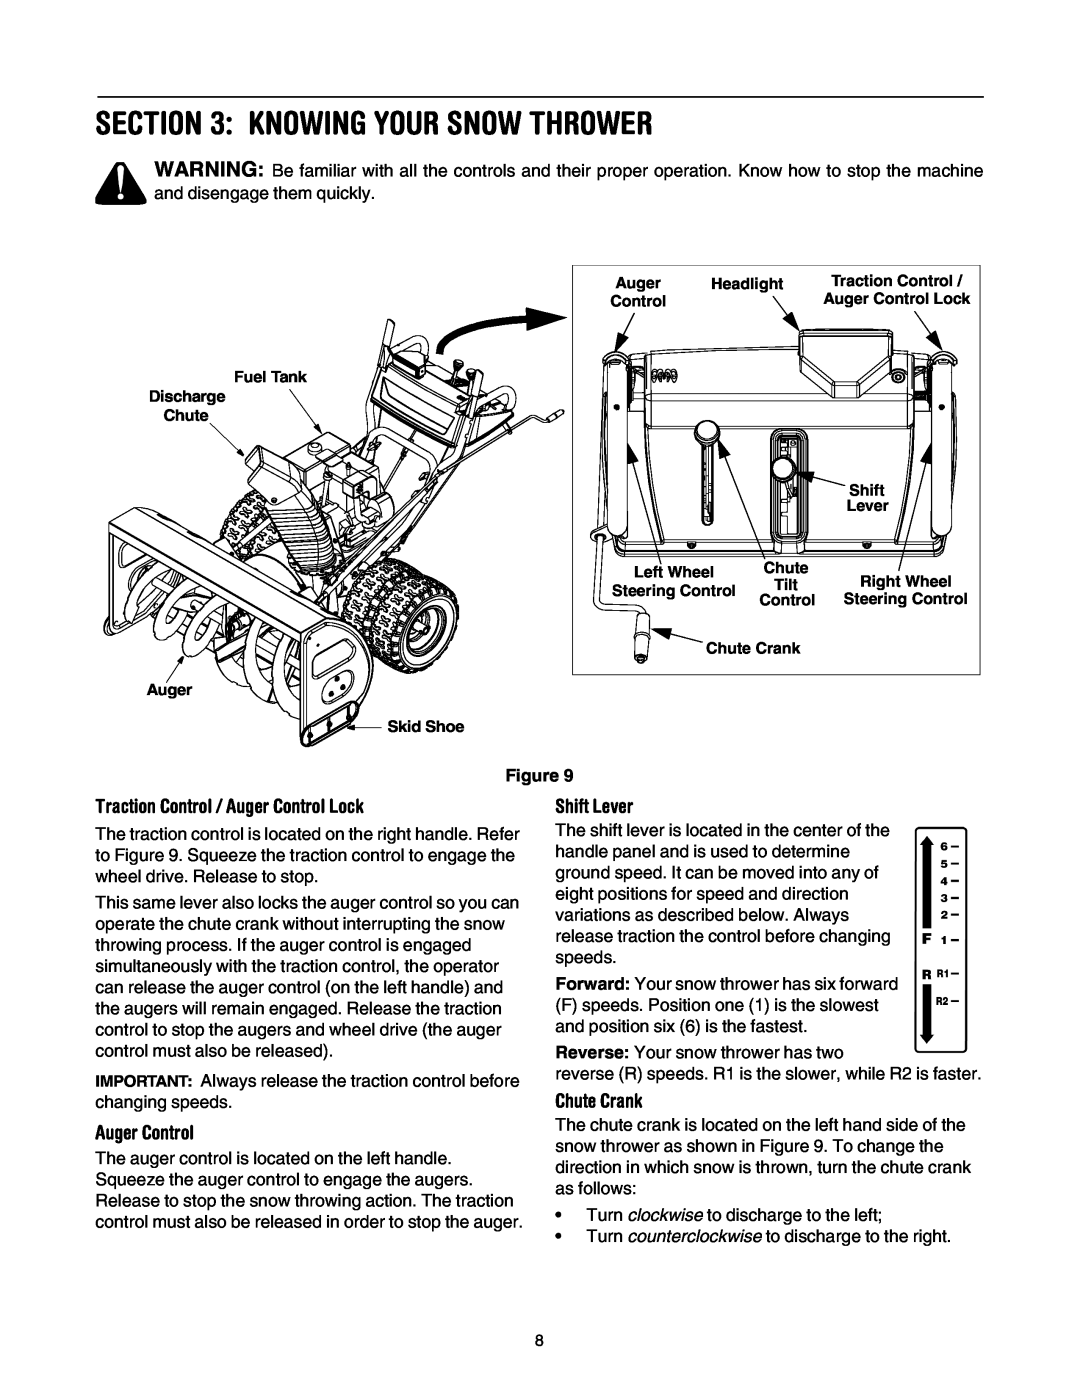 Cub Cadet 1345 SWE manual Knowing Your Snow Thrower, Traction Control / Auger Control Lock, Shift Lever, Chute Crank 